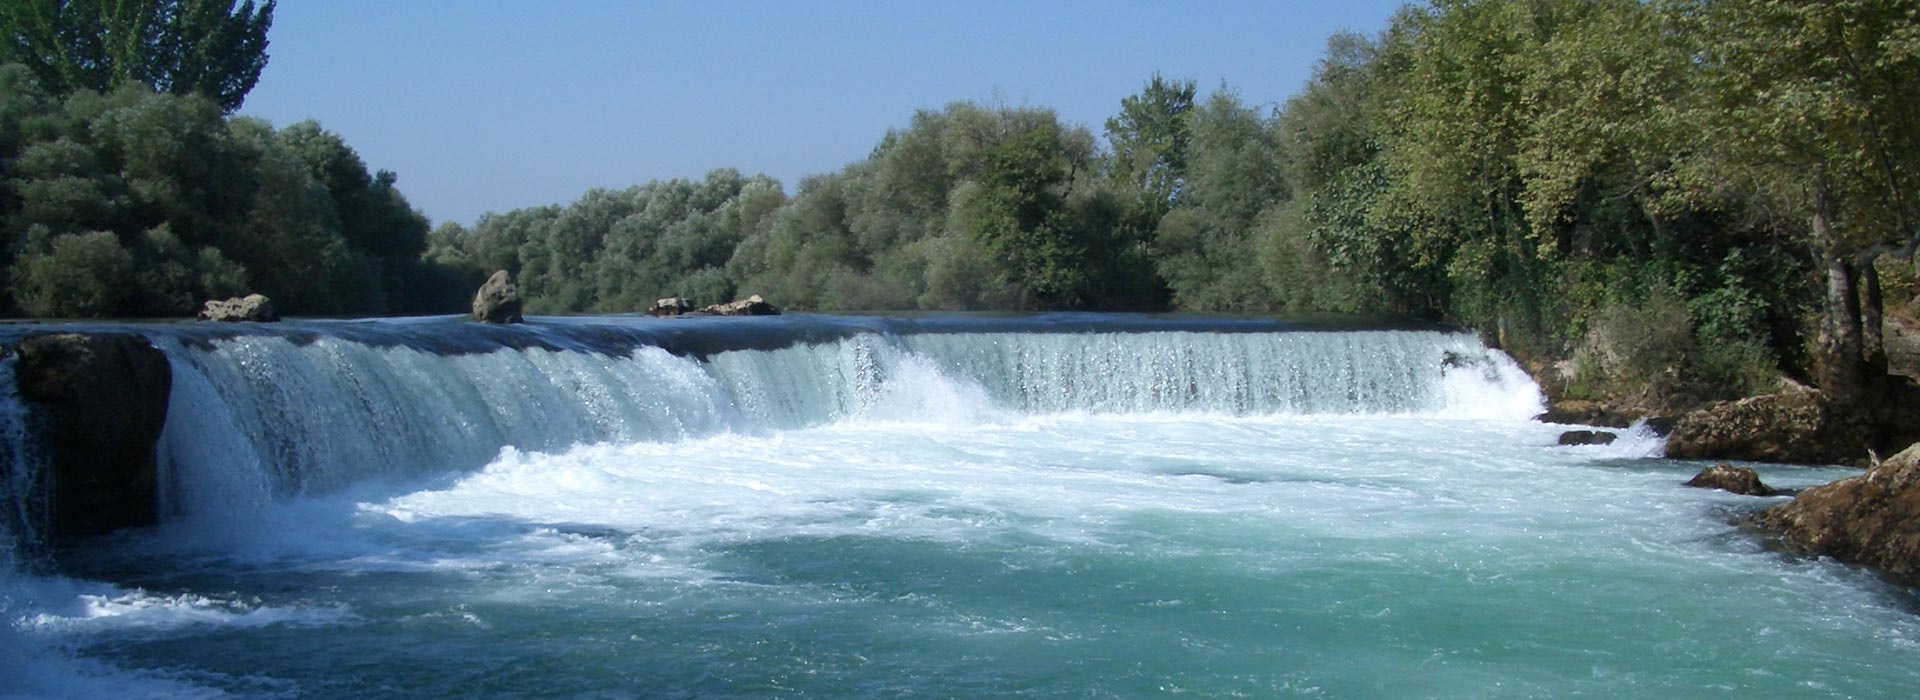 Side rent a car, manavgat waterfall